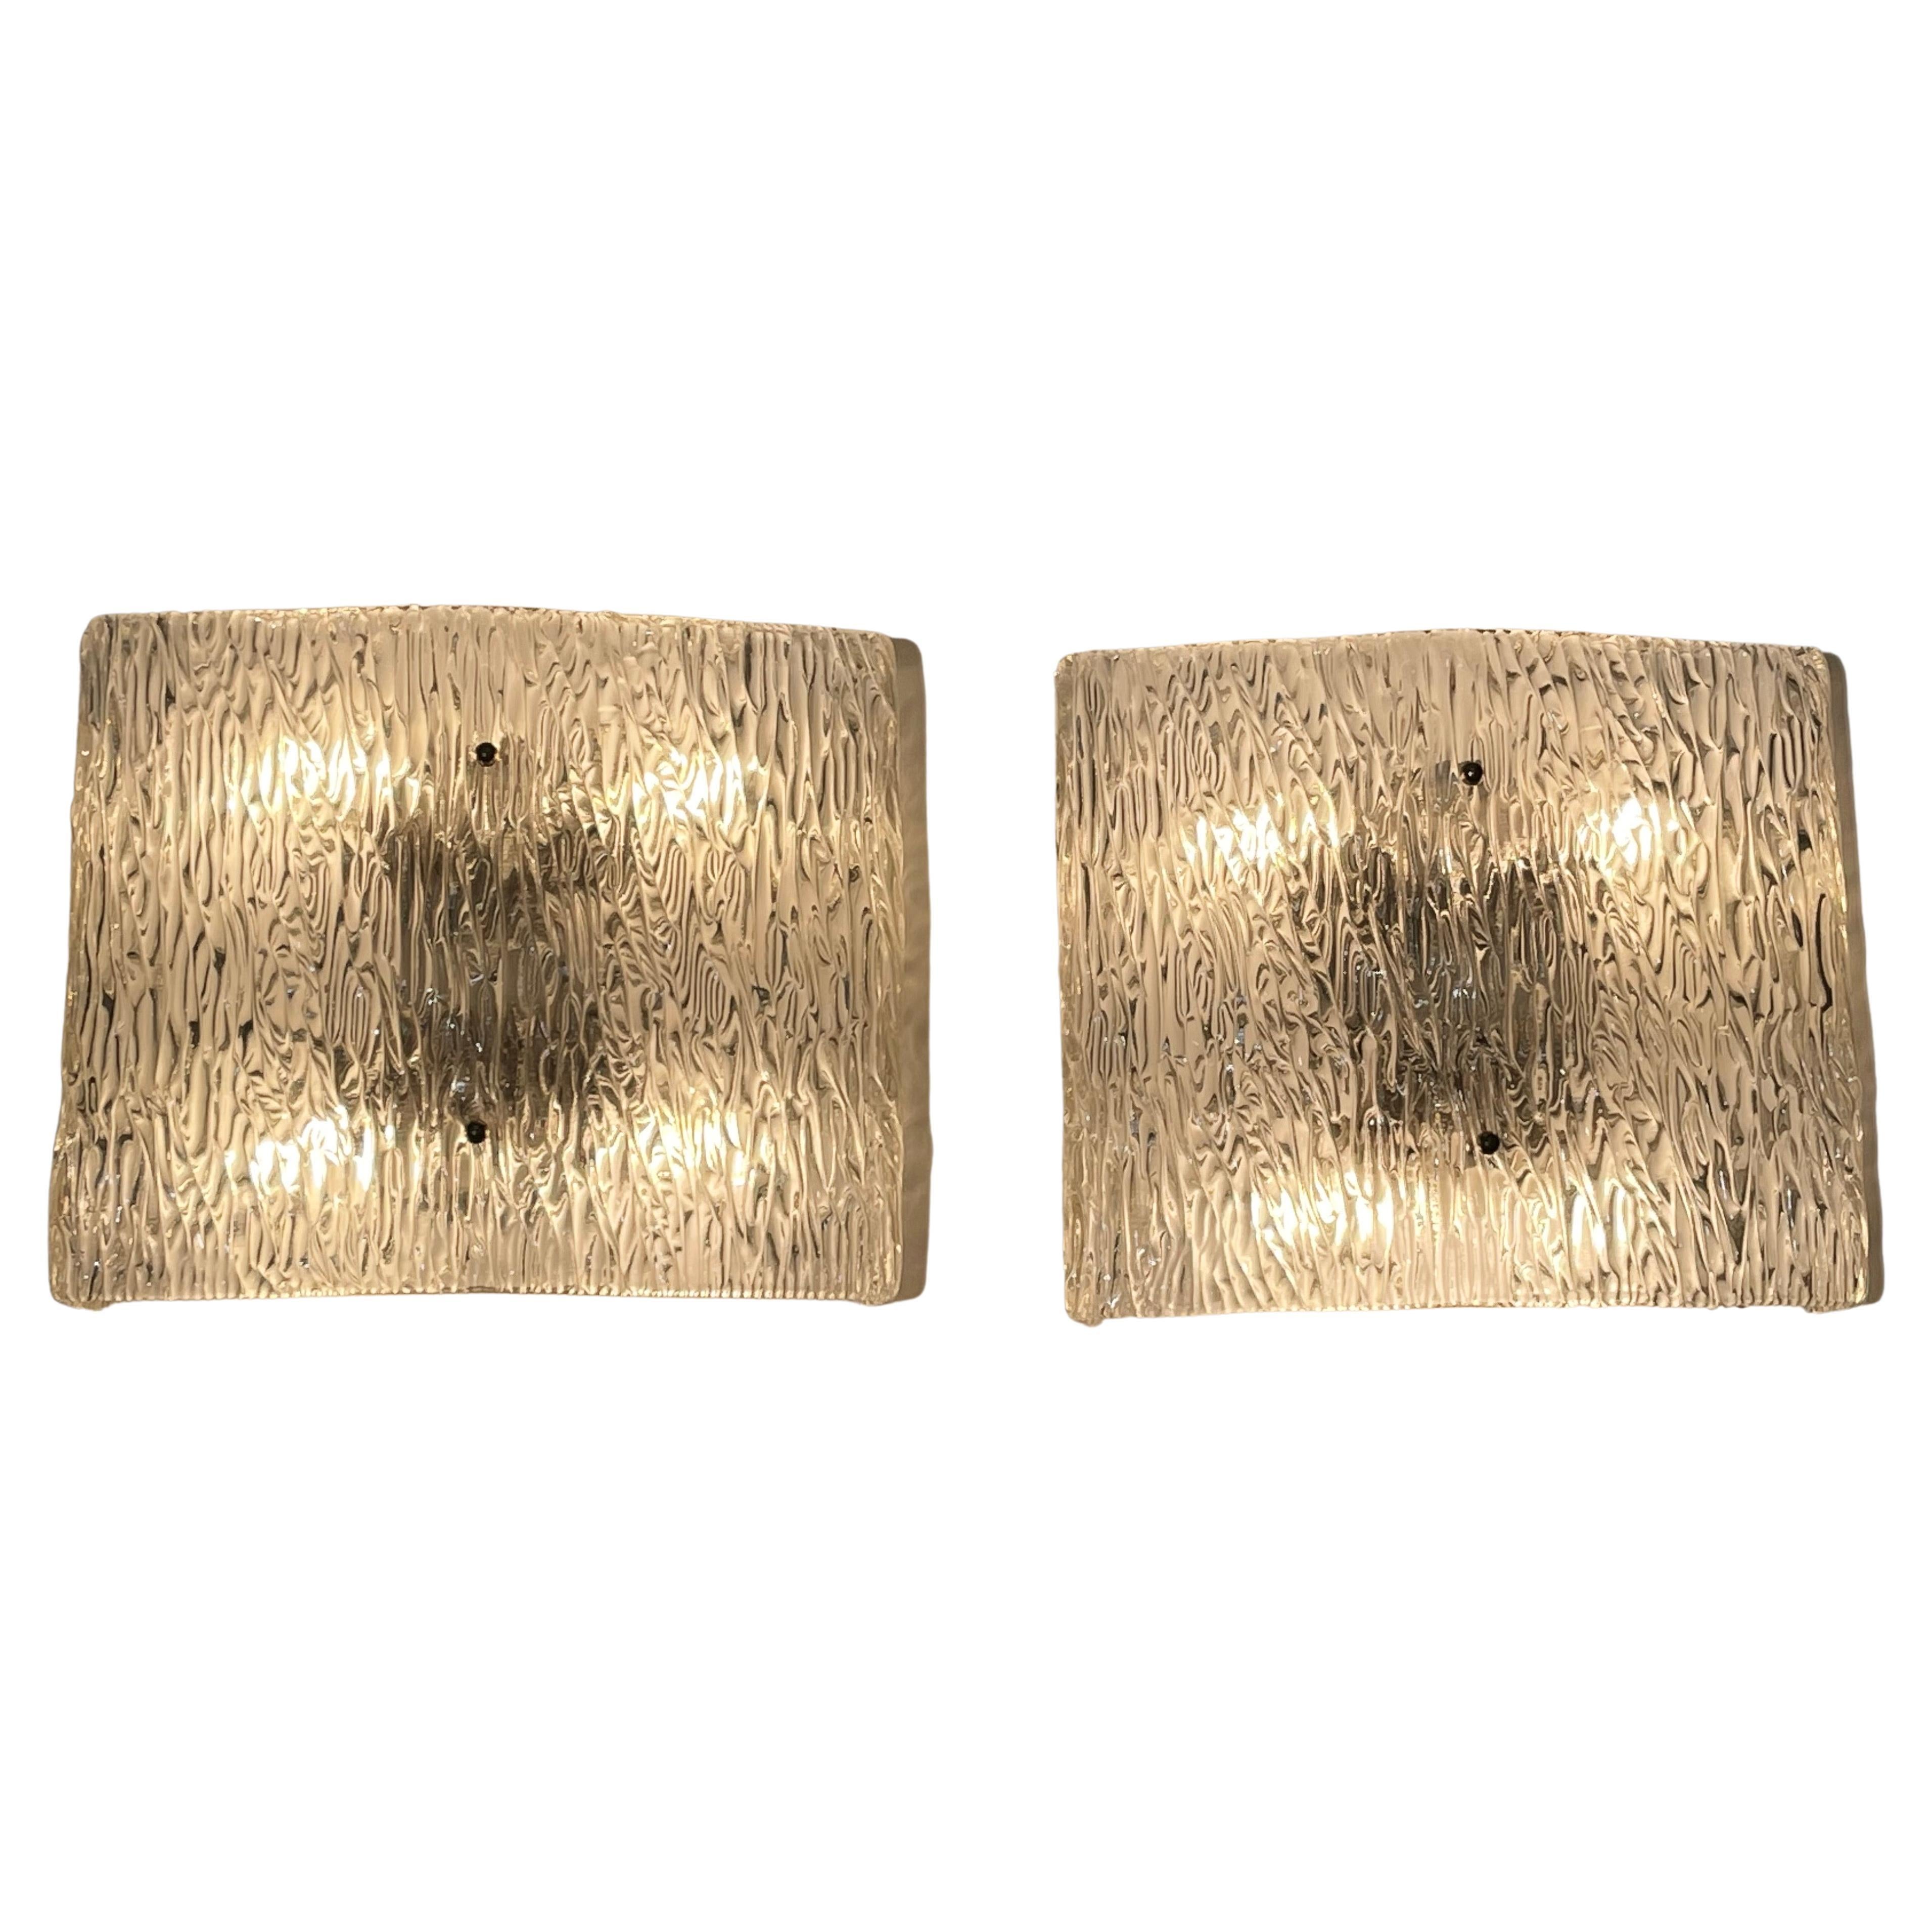 A stunning pair of grand wall sconces by Kaiser, Germany, circa 1960s.
The fixtures are made of thick ice Murano glass elements mounted on a white laqiered metal frame.

Socket: Each 4 x e27 for standard screw bulbs.
  